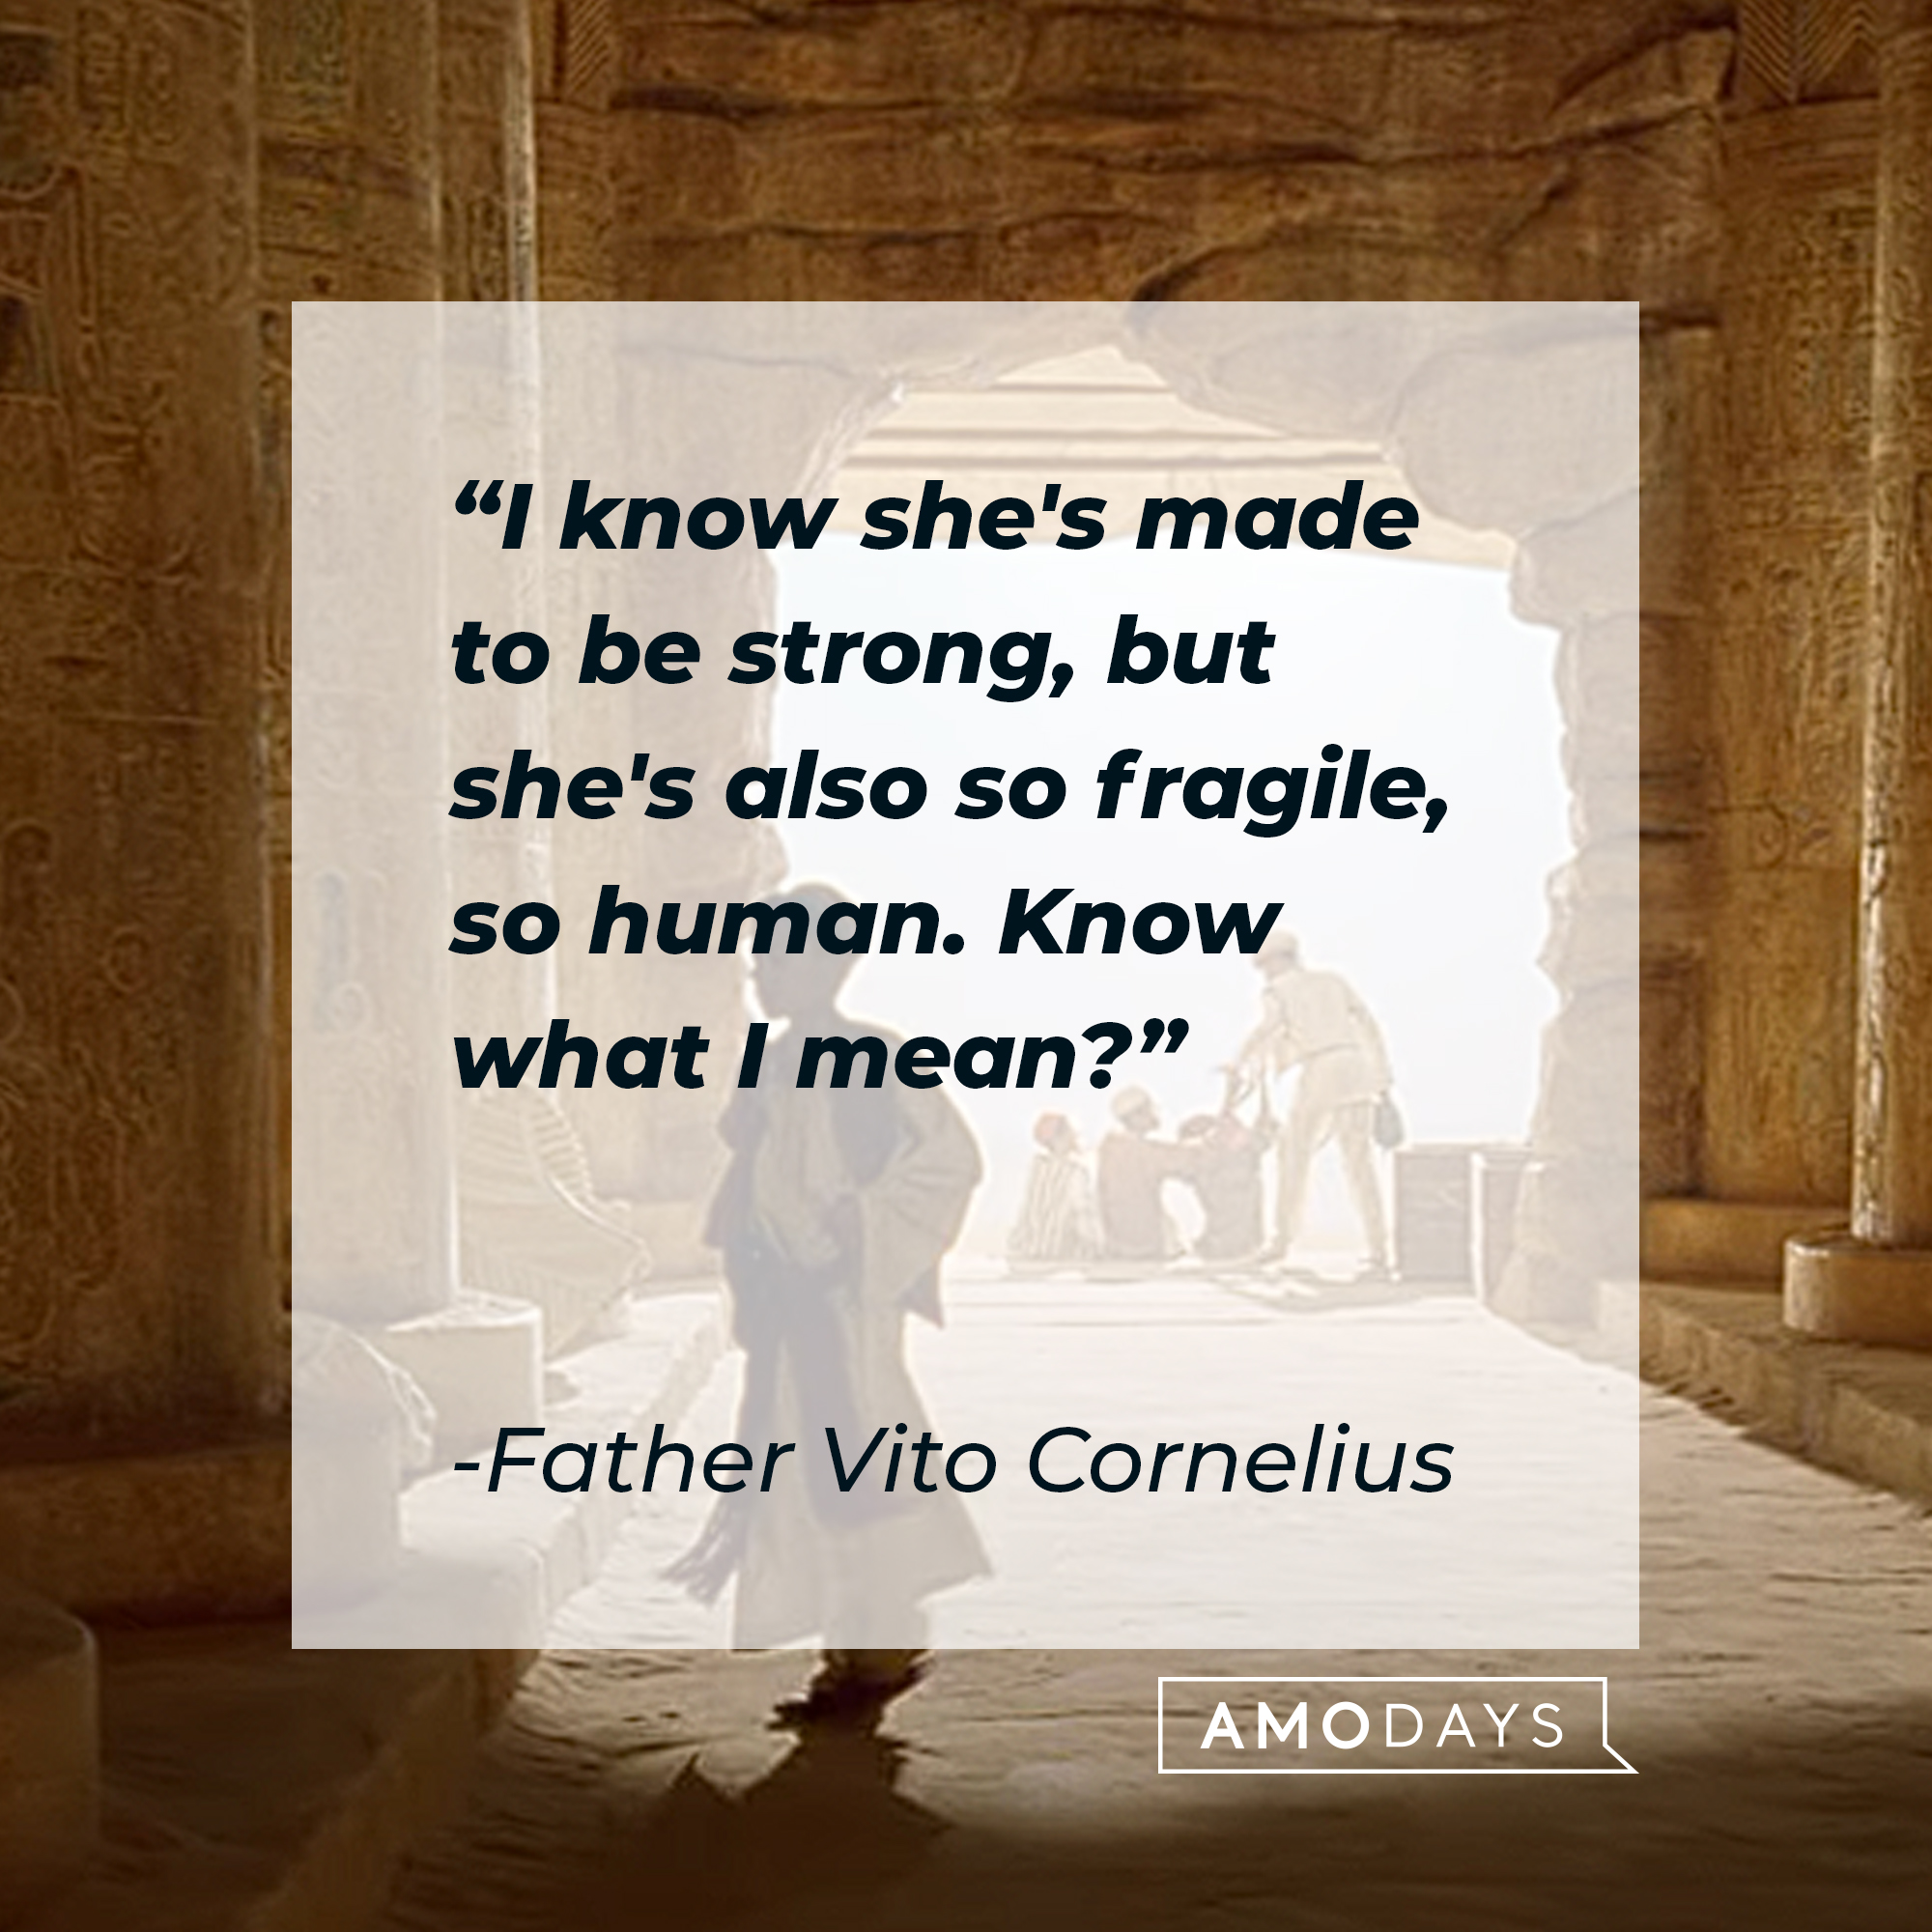 Father Vito Cornelius's quote: "I know she's made to be strong, but she's also so fragile, so human. Know what I mean?" | Source: youtube.com/sonypictures